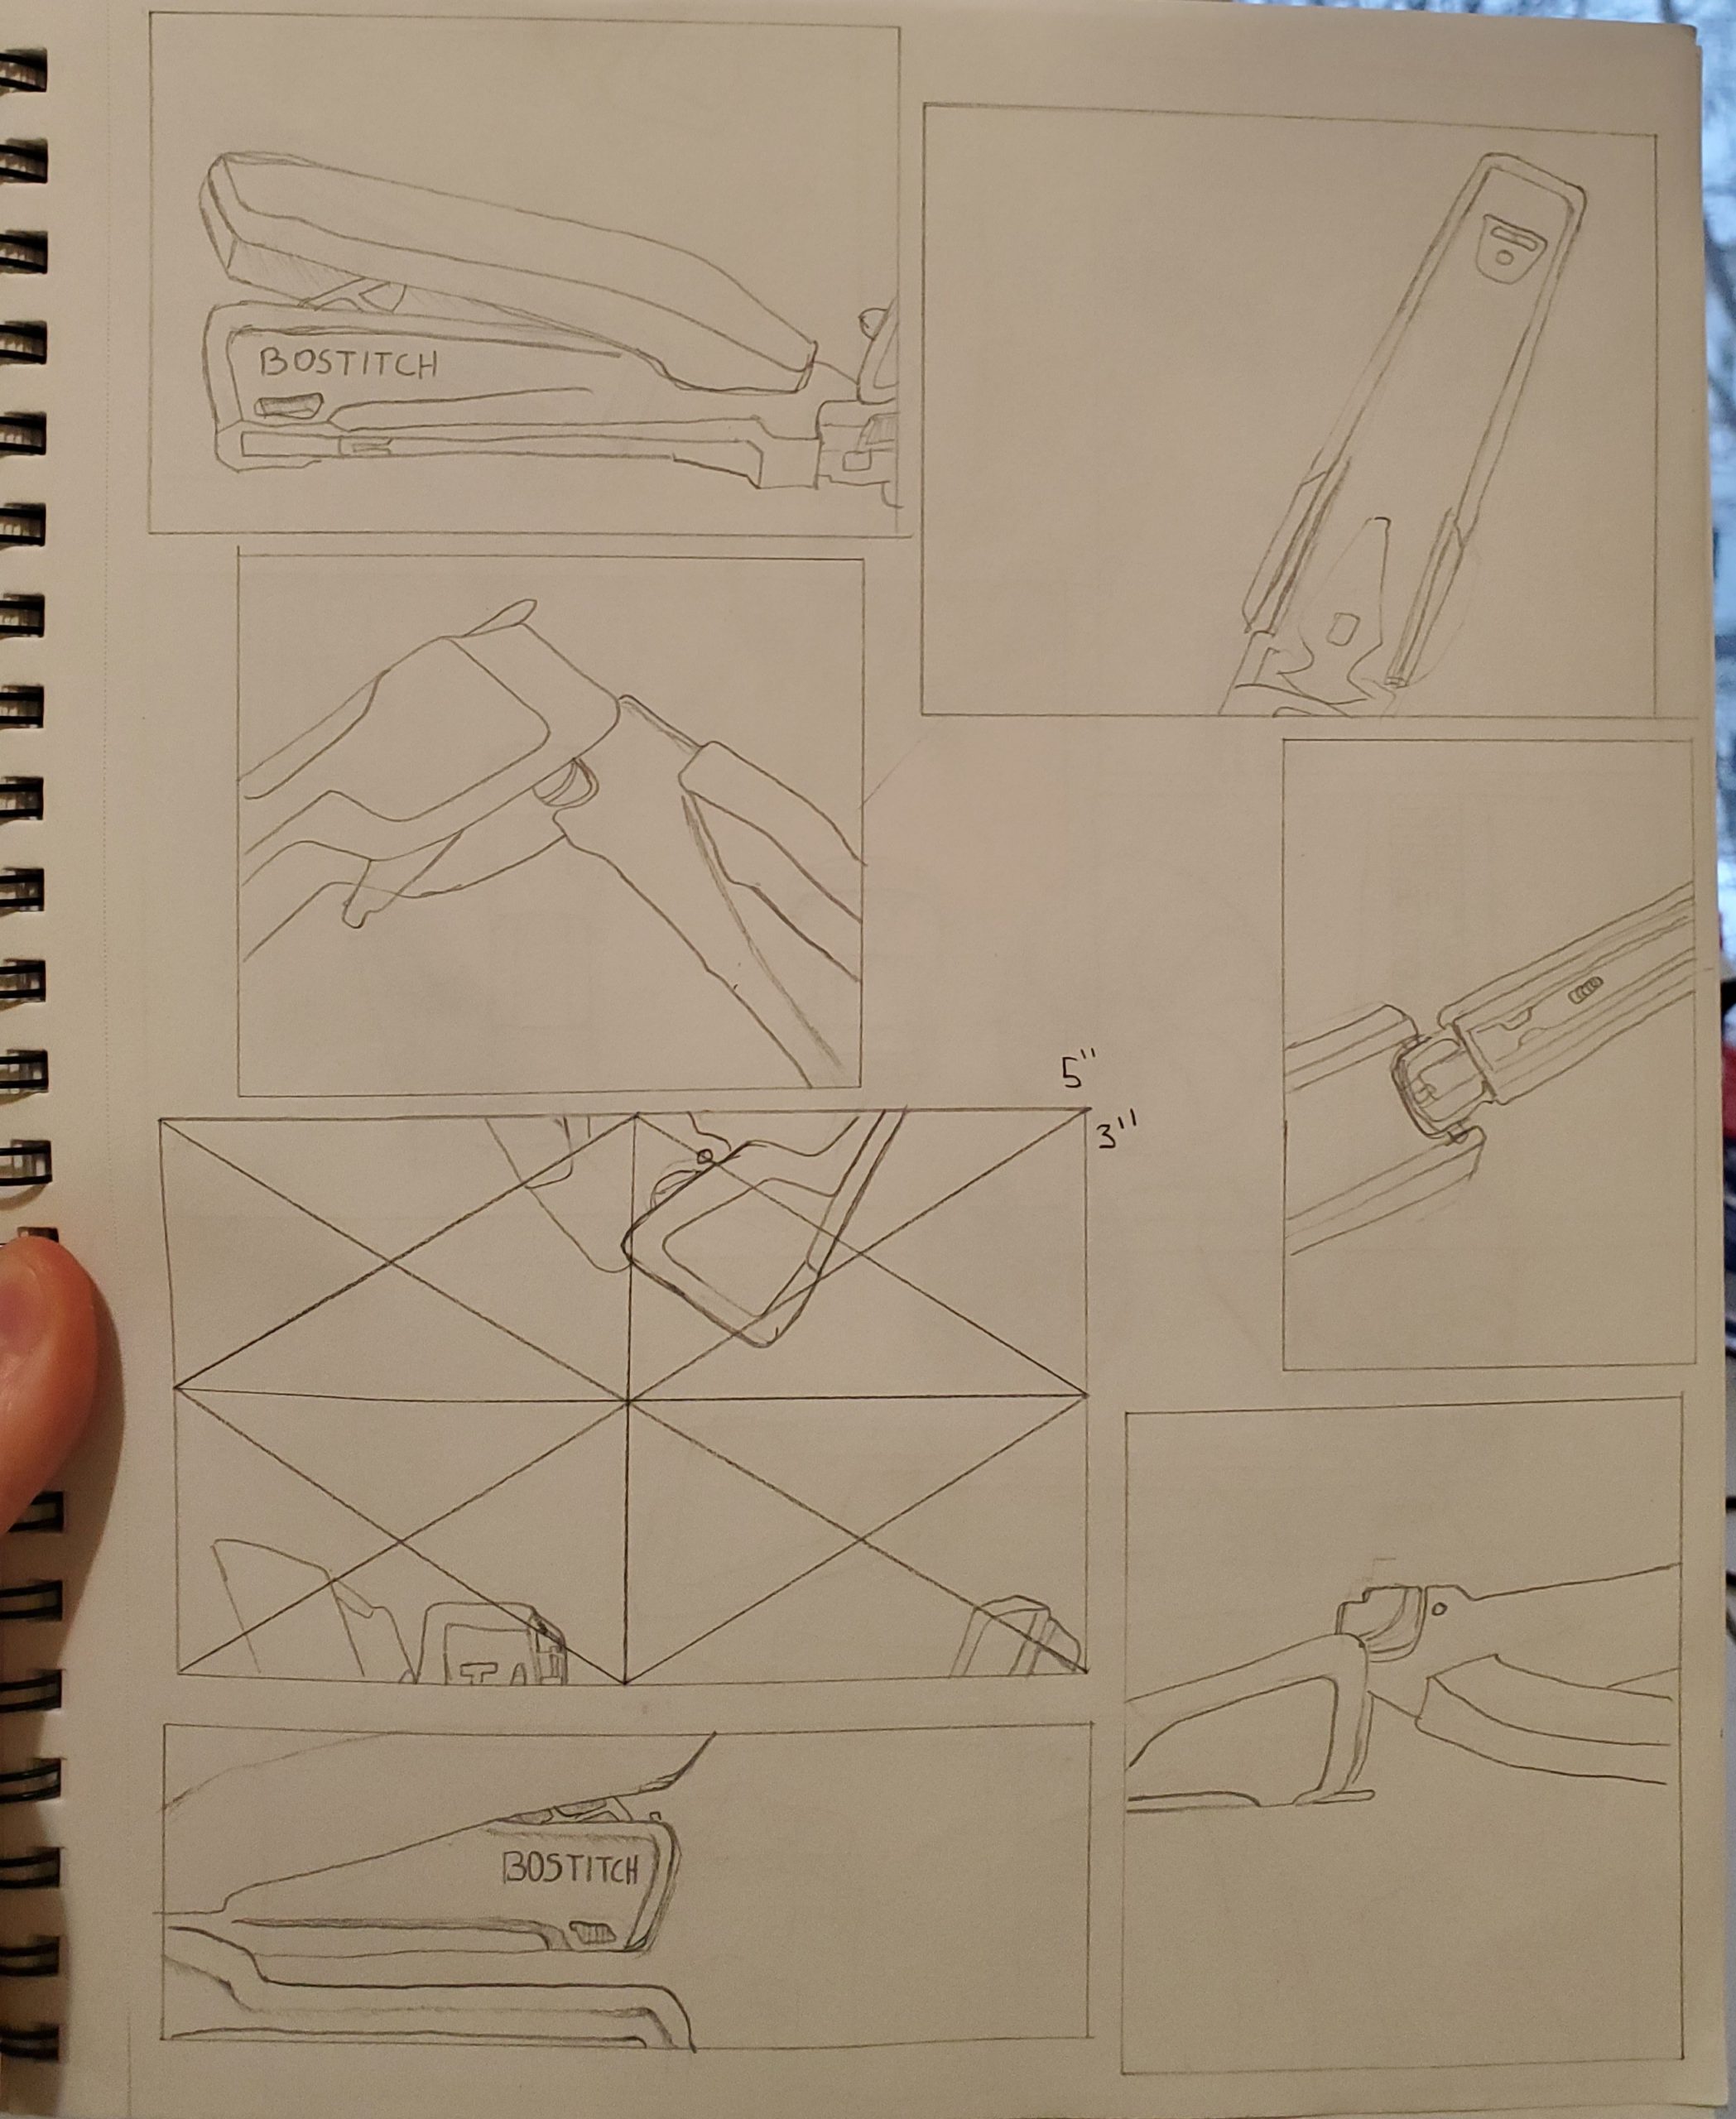 Thumbnail Sketches + Grid Transposition